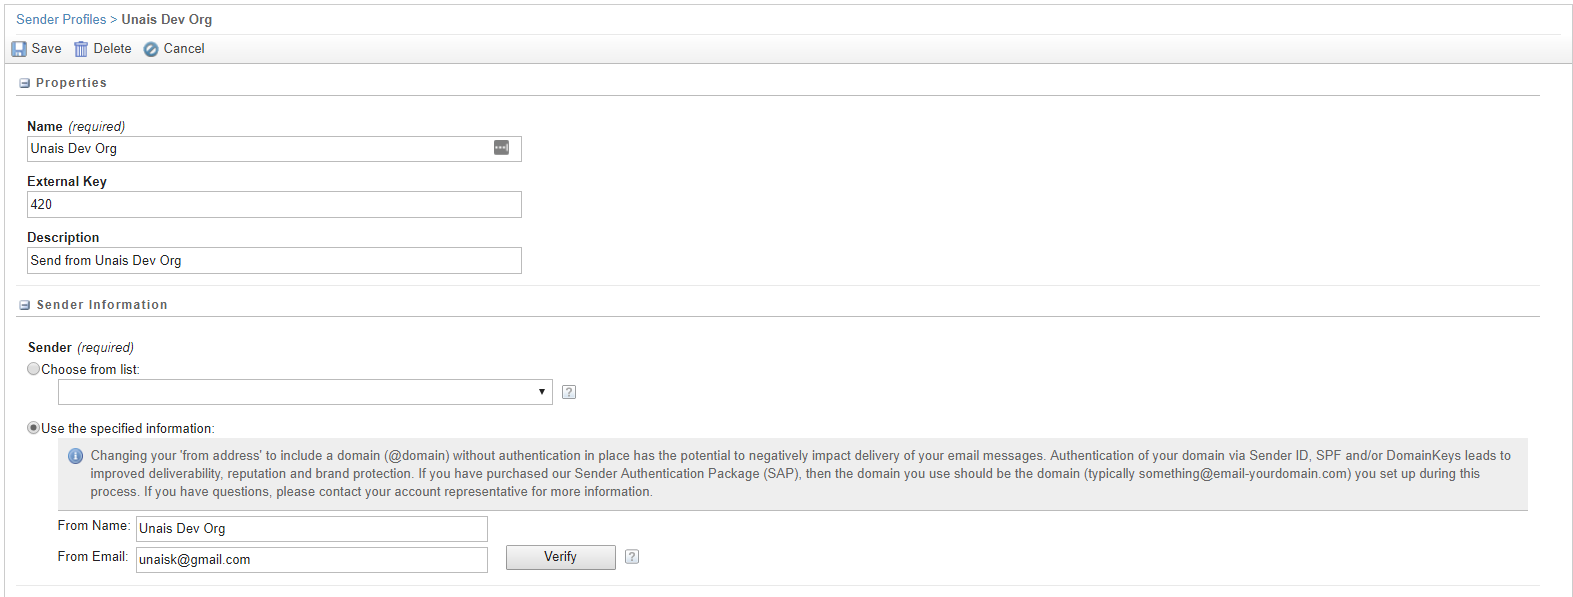 Verify option in Sender Profile for From Email Address